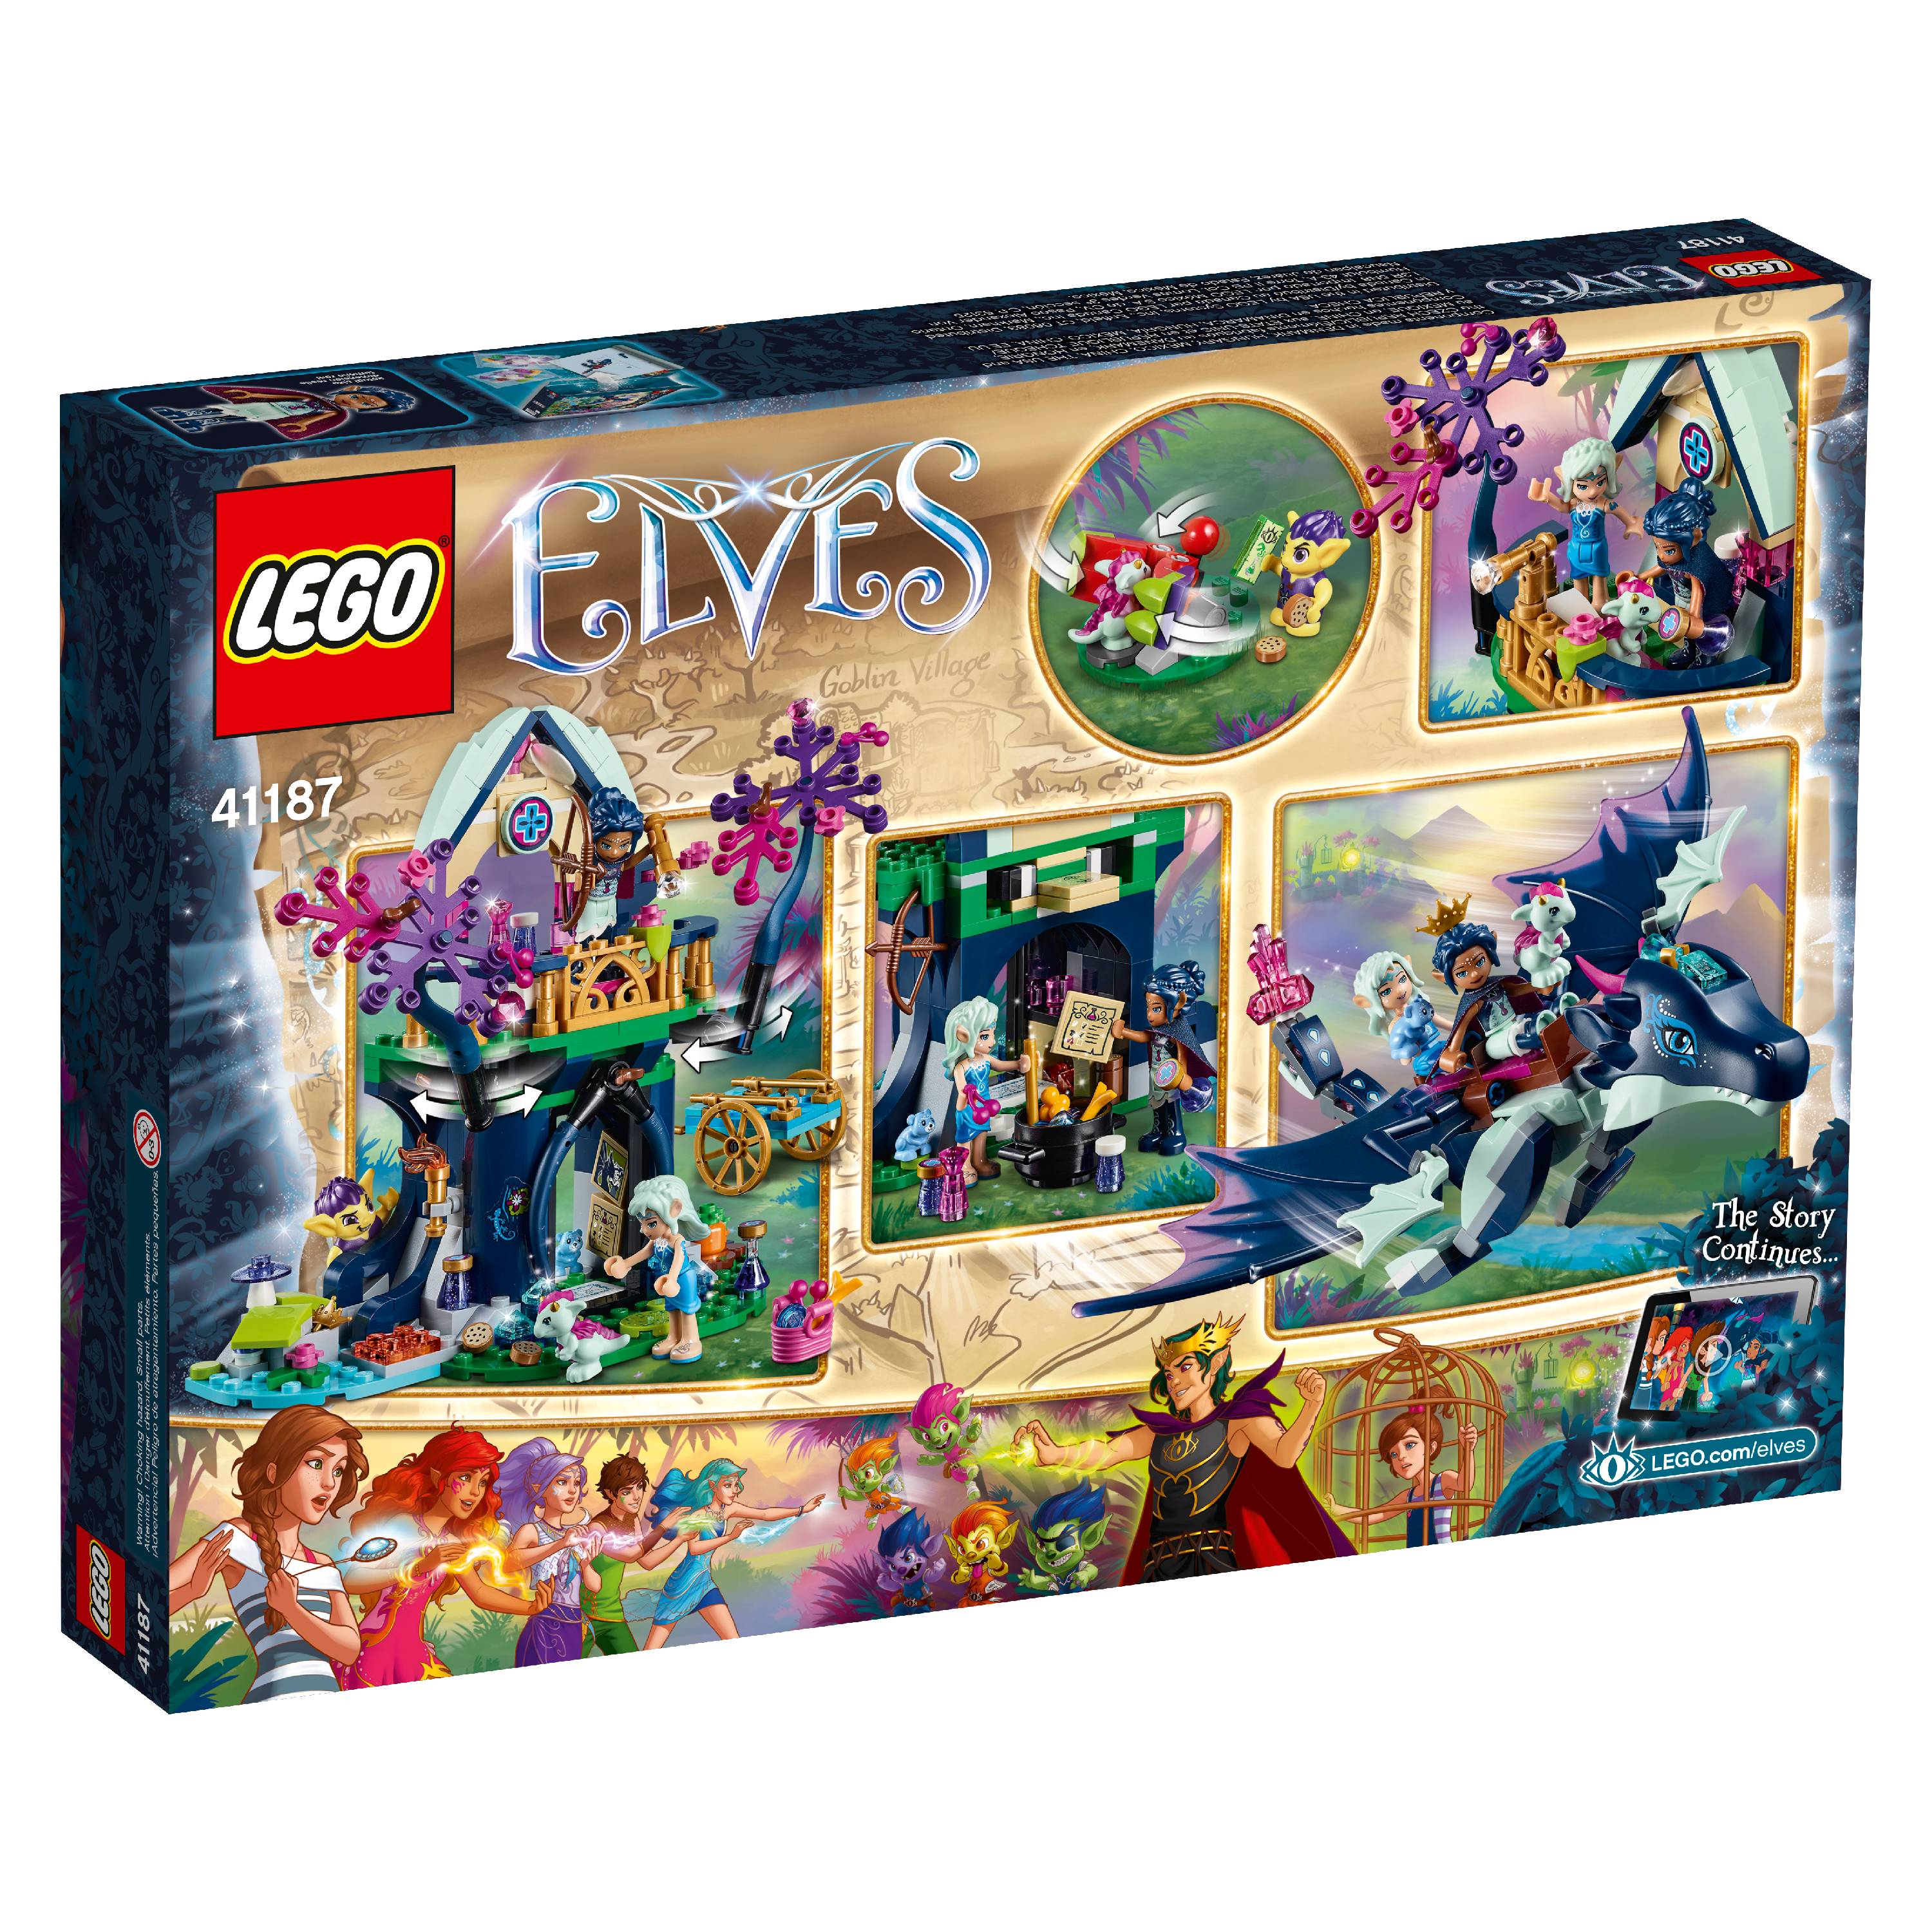 LEGO Elves Rosalyn's Healing Hideout 41187 (460 Pieces) - image 2 of 6